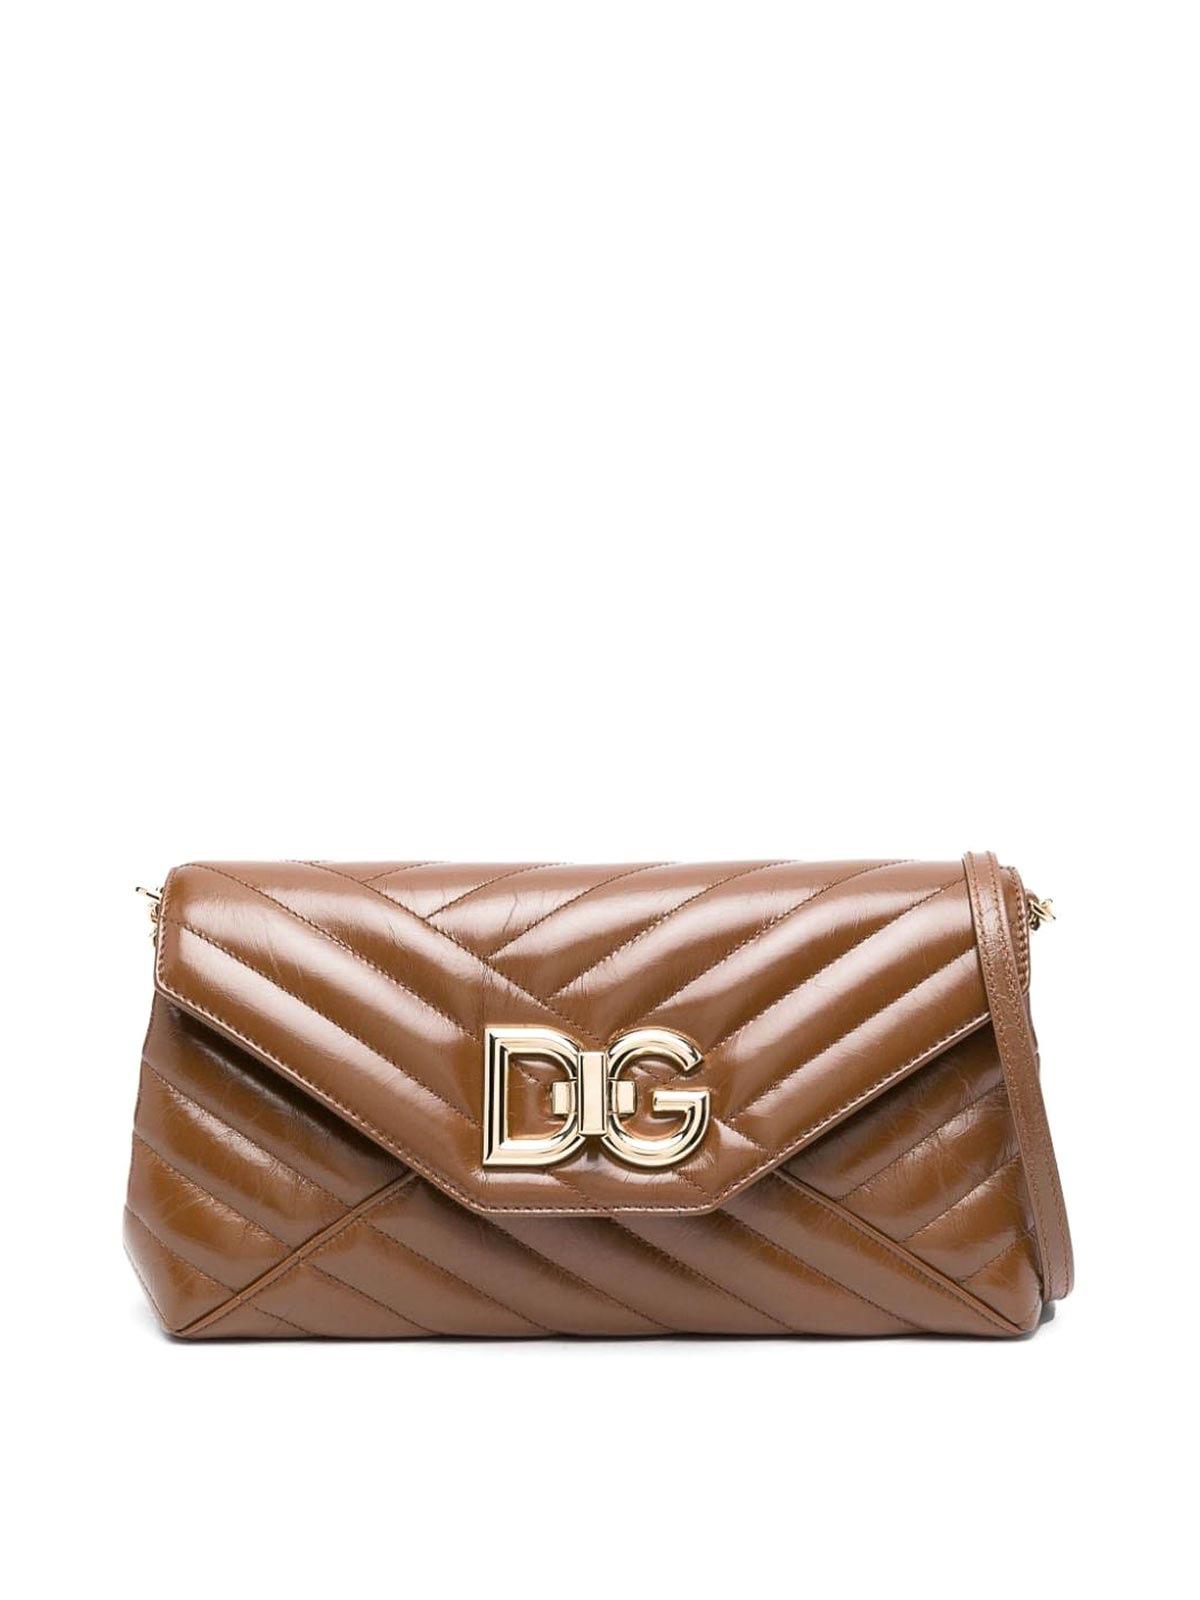 Dolce & Gabbana Lop Quilted Leather Bag In Beige